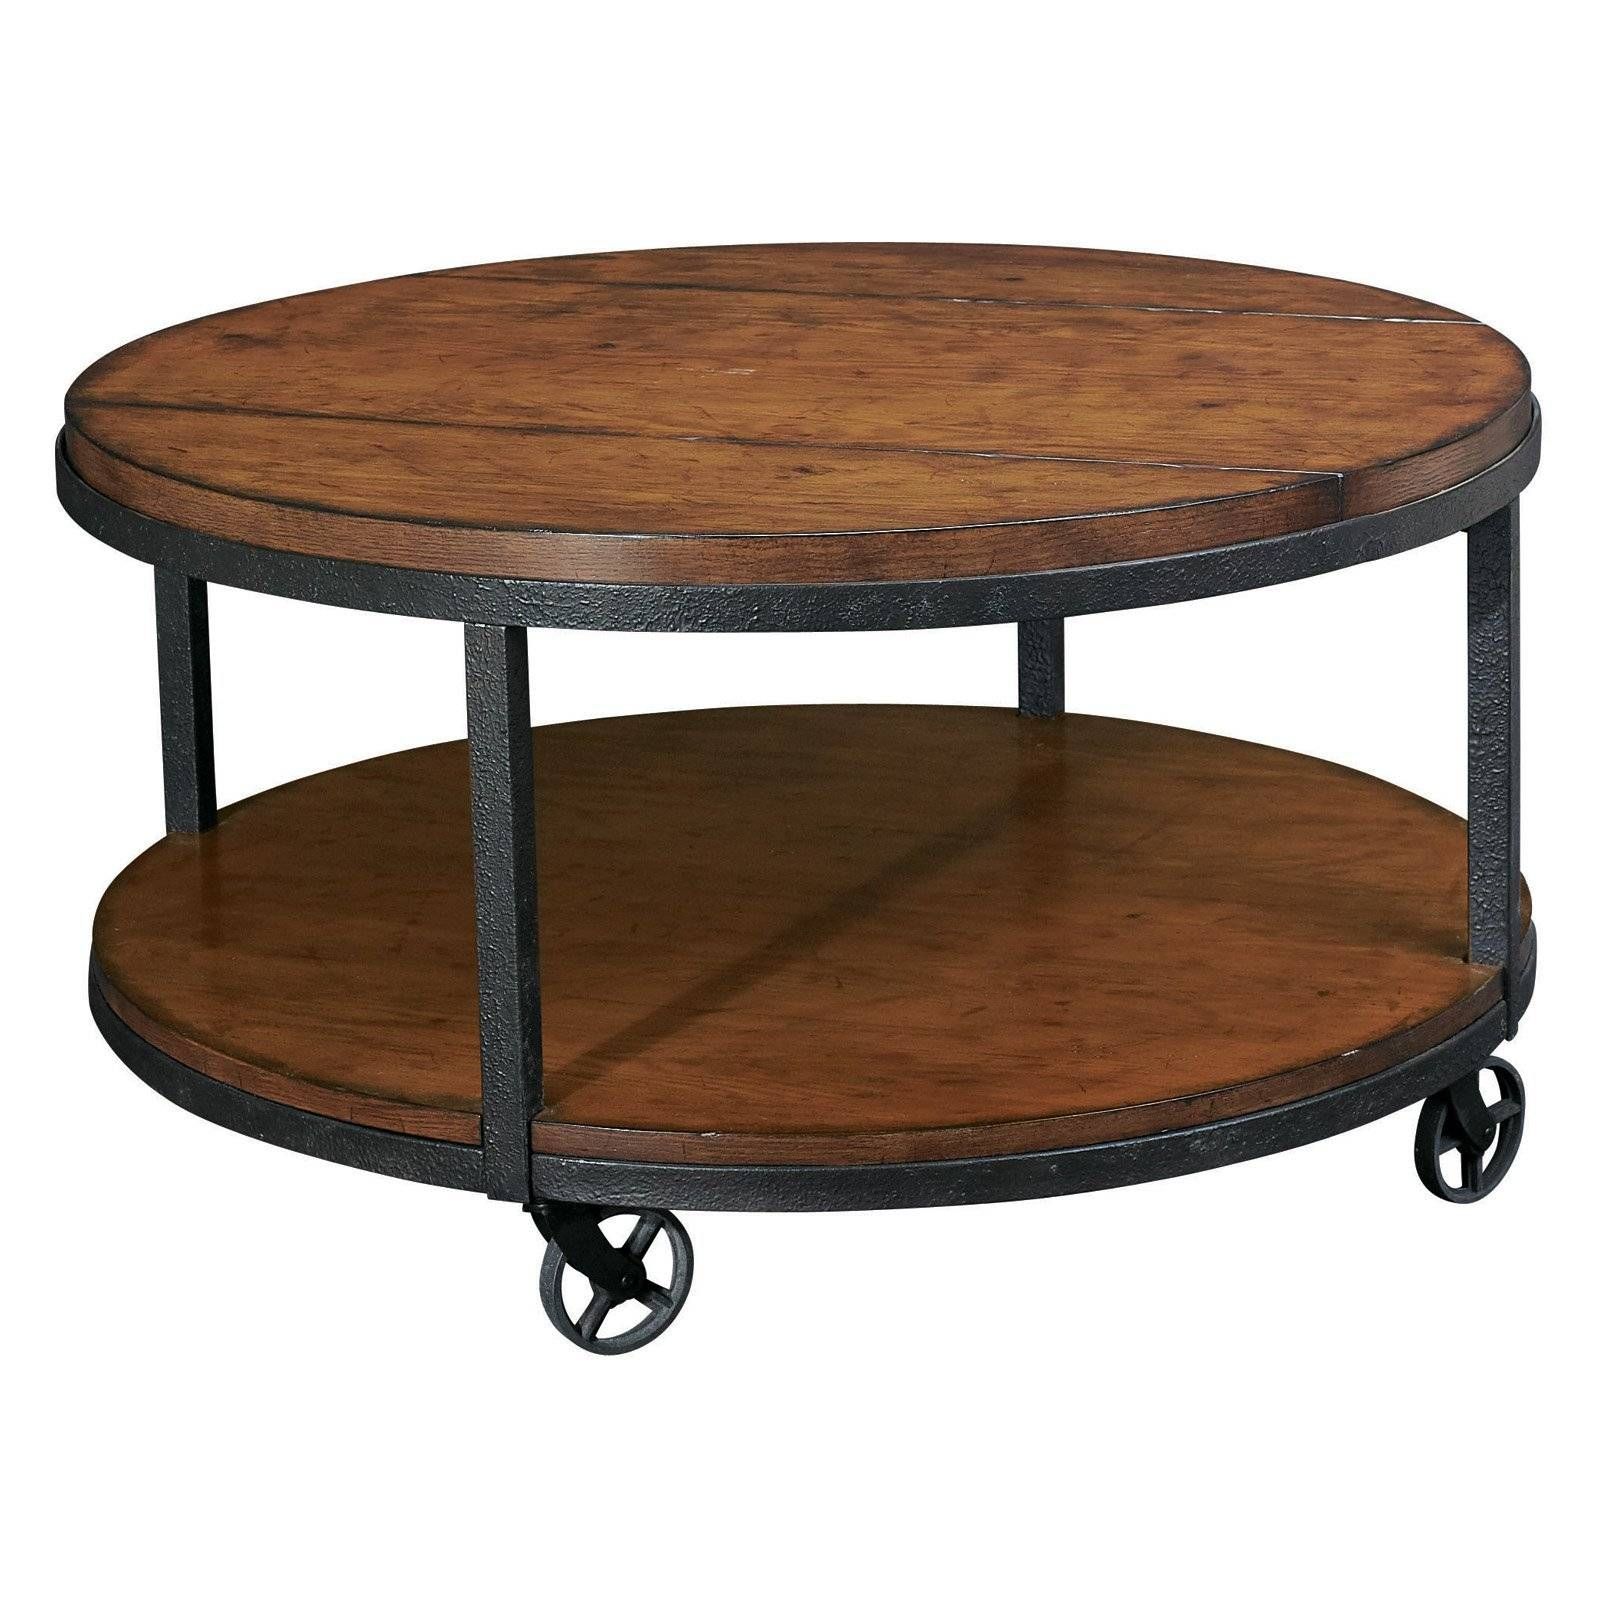 Coffee Table: Beautiful Coffee Table On Casters Ideas Wood Coffee In Glass Coffee Tables With Casters (View 8 of 30)